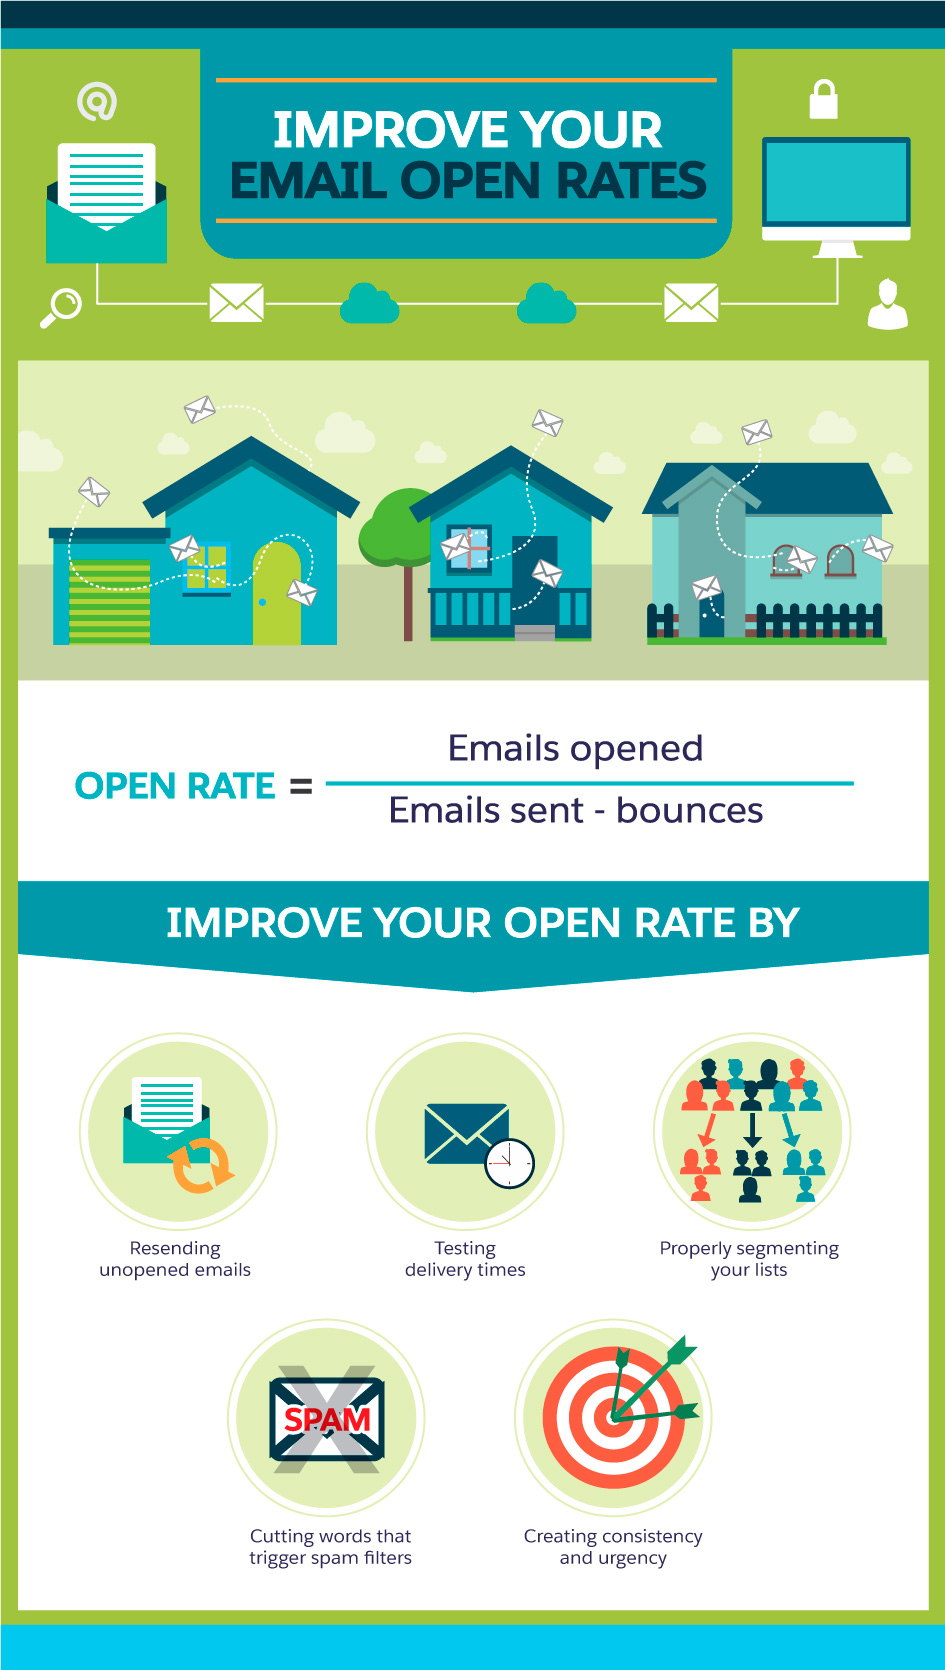 Marketing resources centre - Email